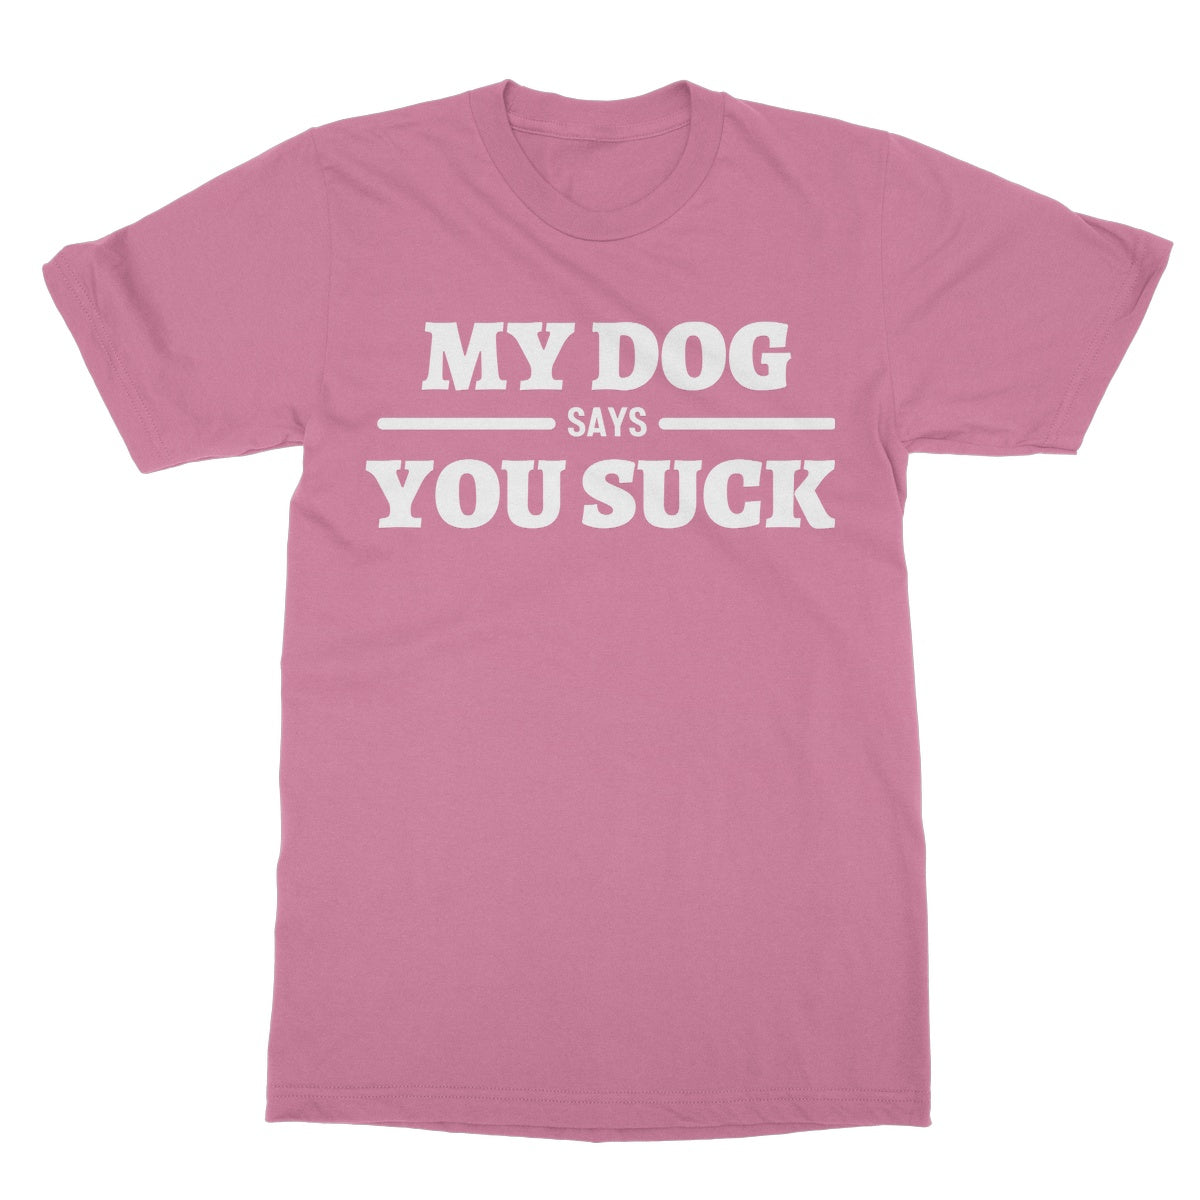 my dog says you suck t shirt pink